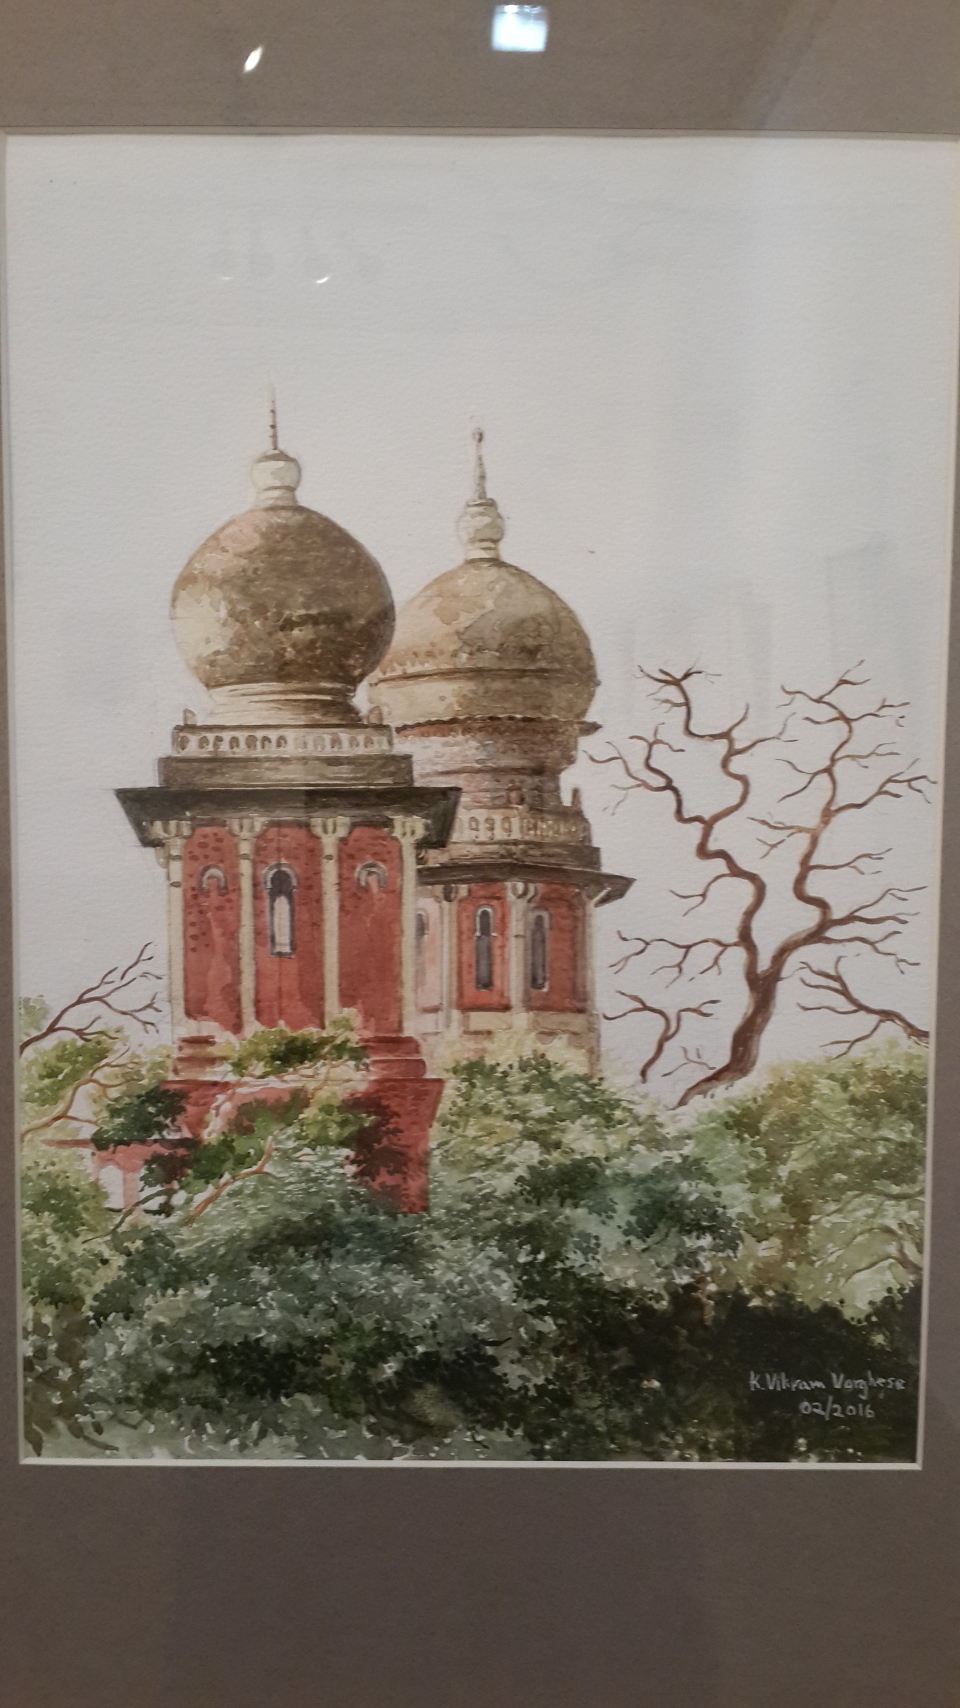 High Court building, Chennai, Indo-Saracenic architecture. Watercolor by Vikram Verghese